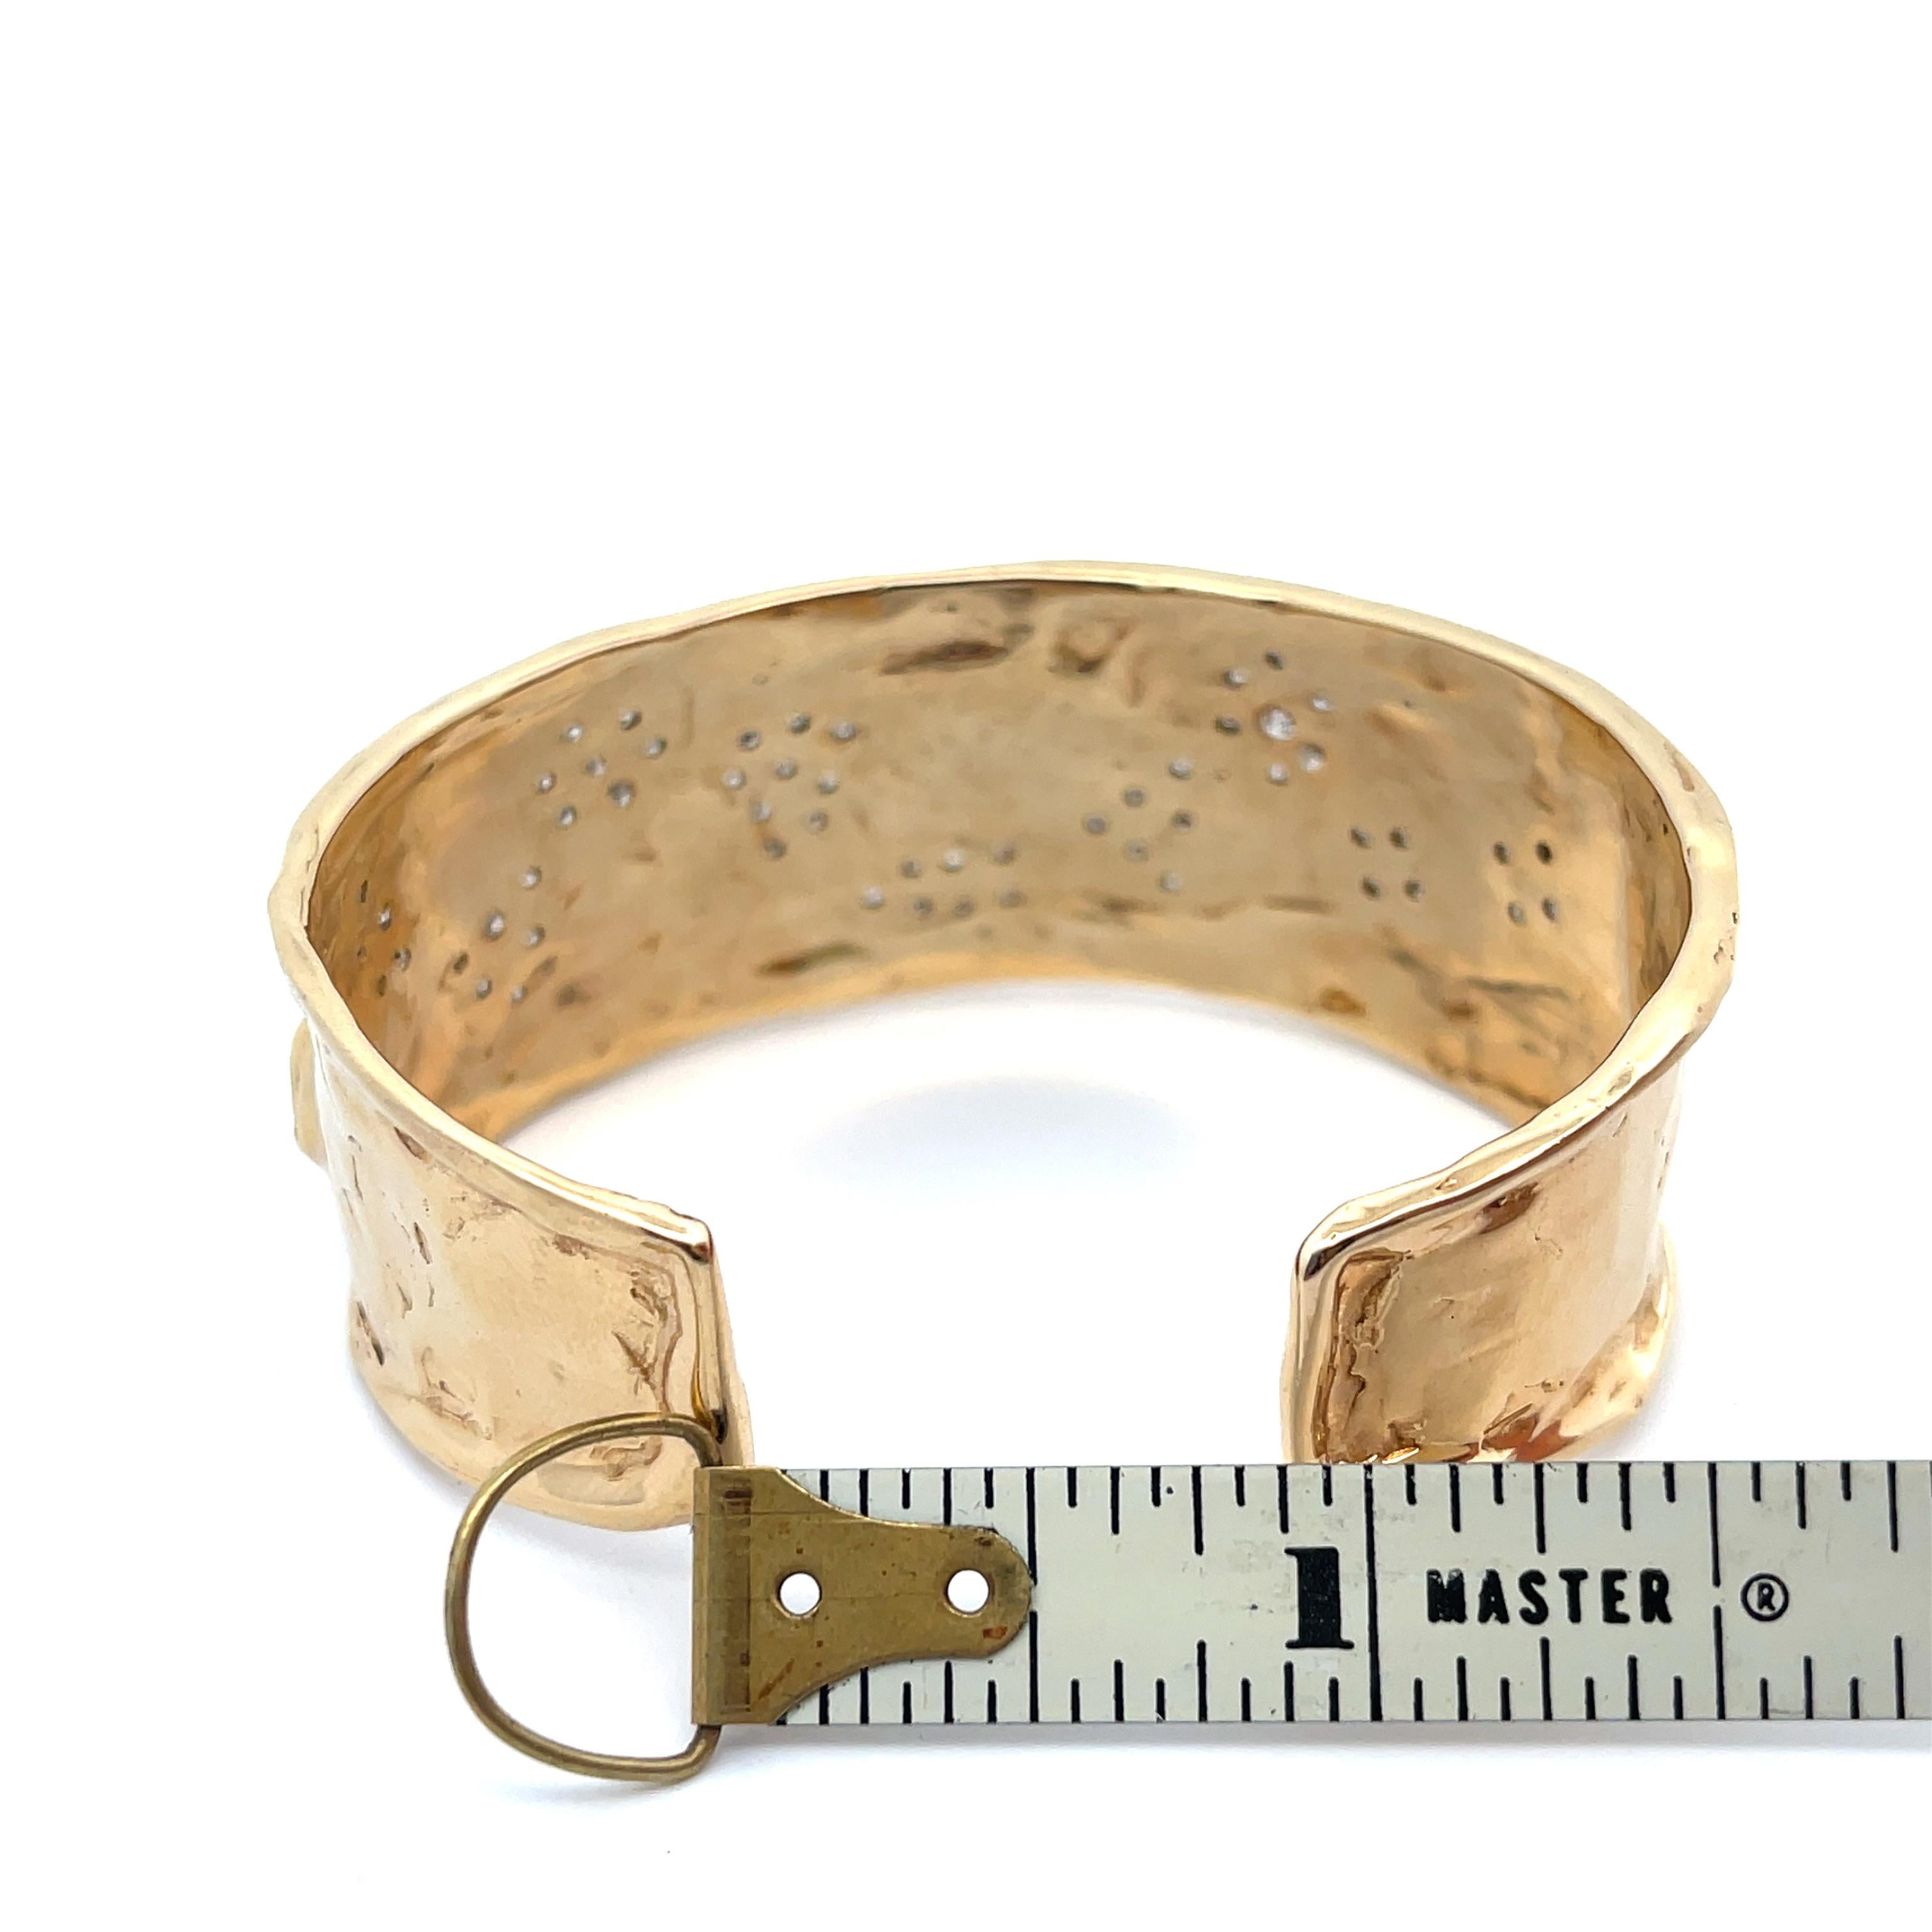 Diamond Pathway Cuff Bracelet in 14K Yellow Gold. The bracelet features approximately 1.50ctw of brilliant round cut diamonds. Perfect for a small wrist. The opening of the cuff is about 1 inch. Inner circumference of the cuff is 6 inches.
24mm